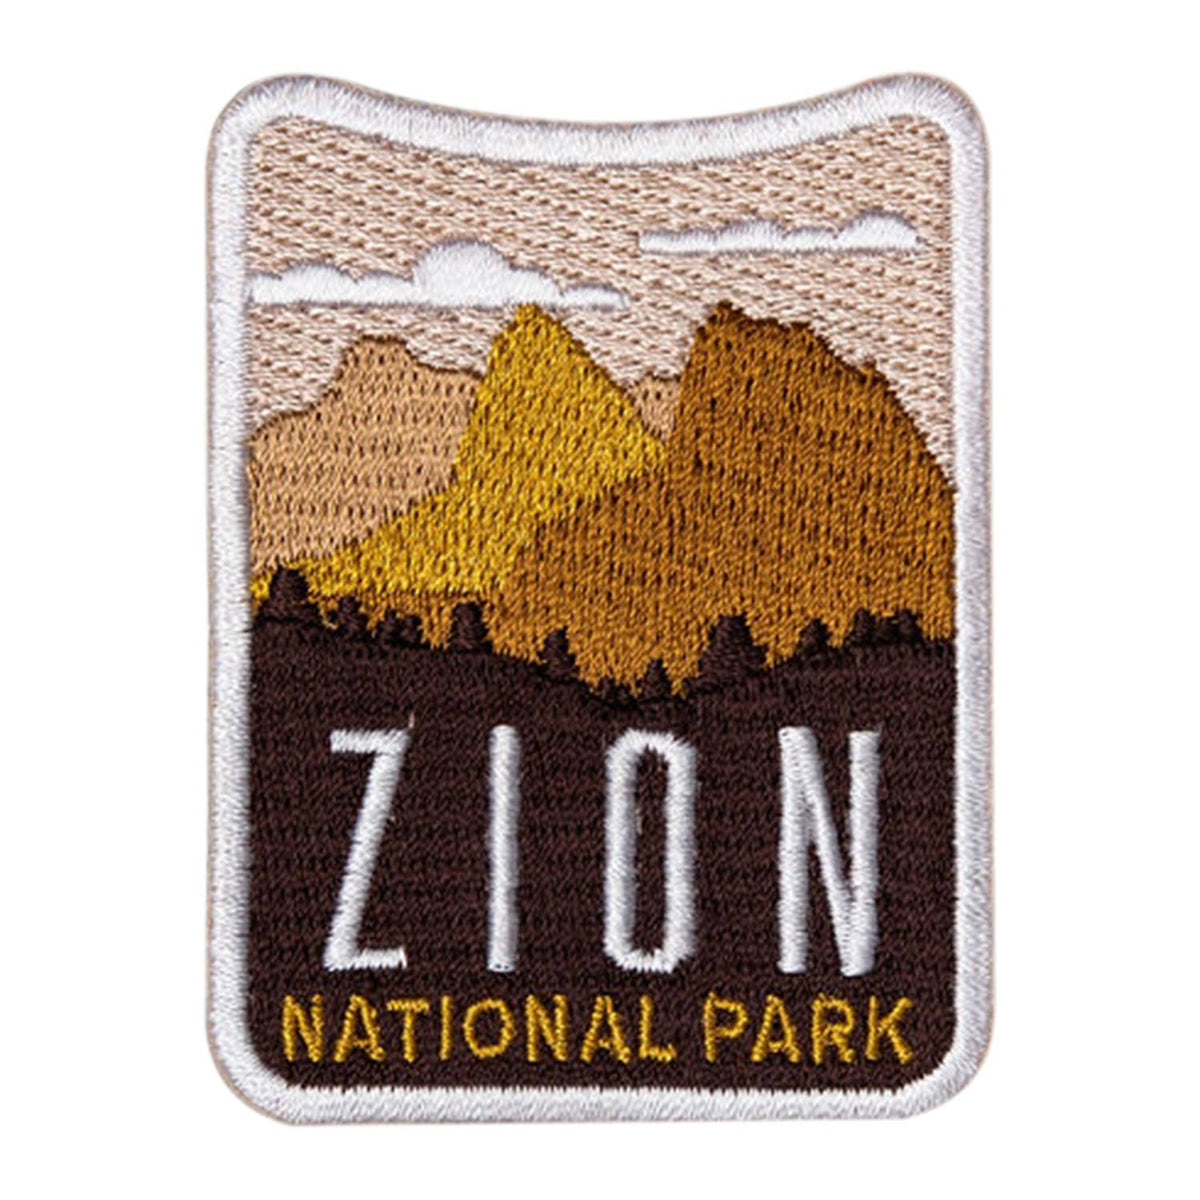 Zion National Park Iron-on Patchy